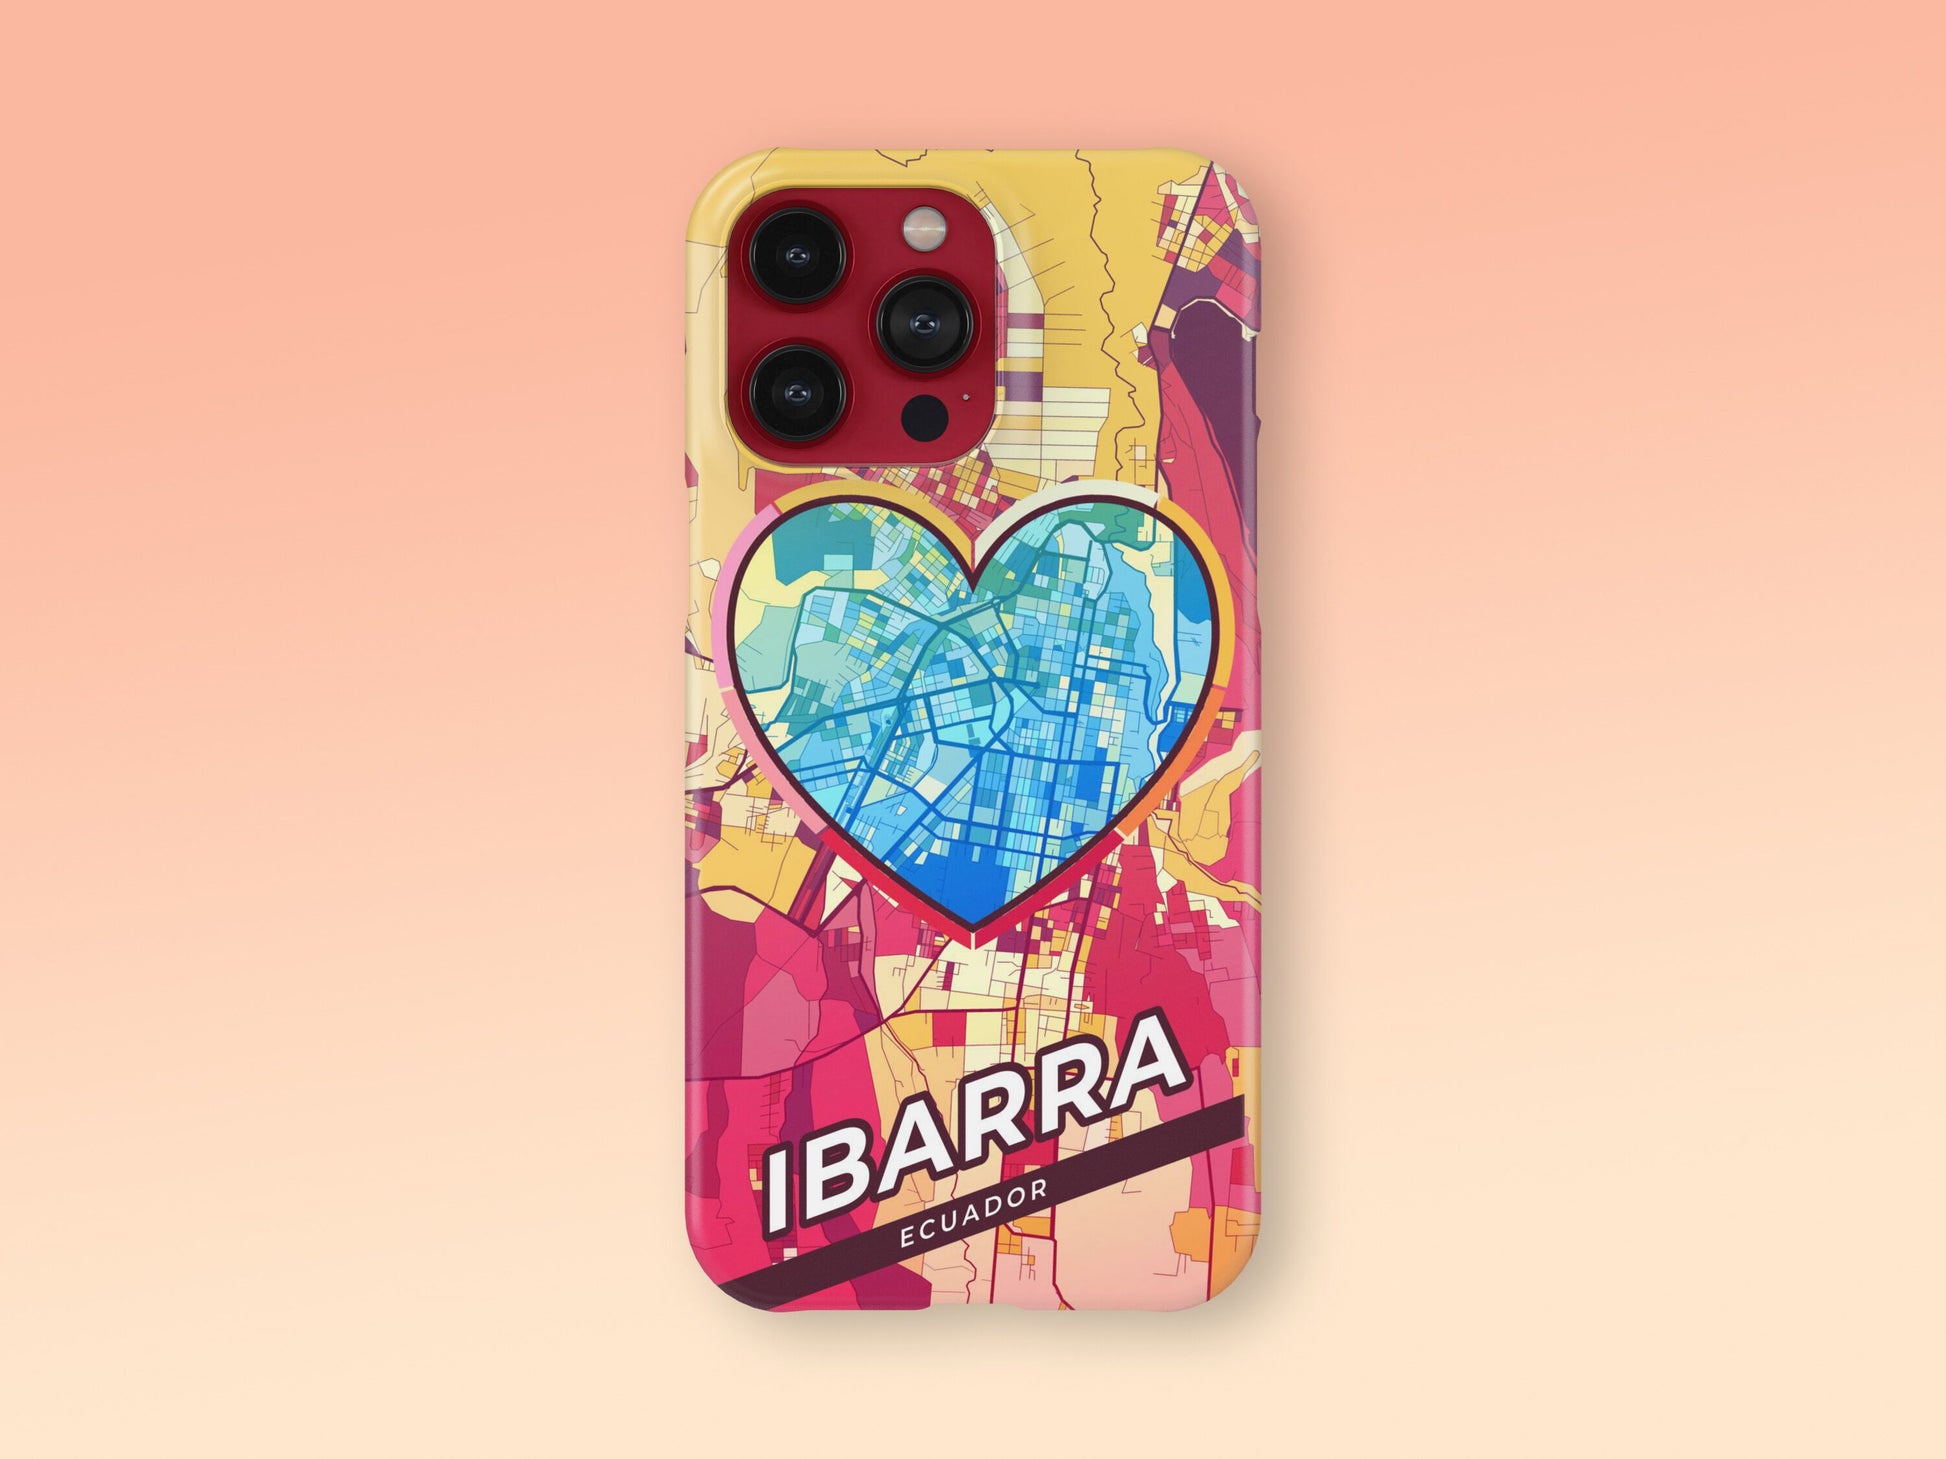 Ibarra Ecuador slim phone case with colorful icon. Birthday, wedding or housewarming gift. Couple match cases. 2